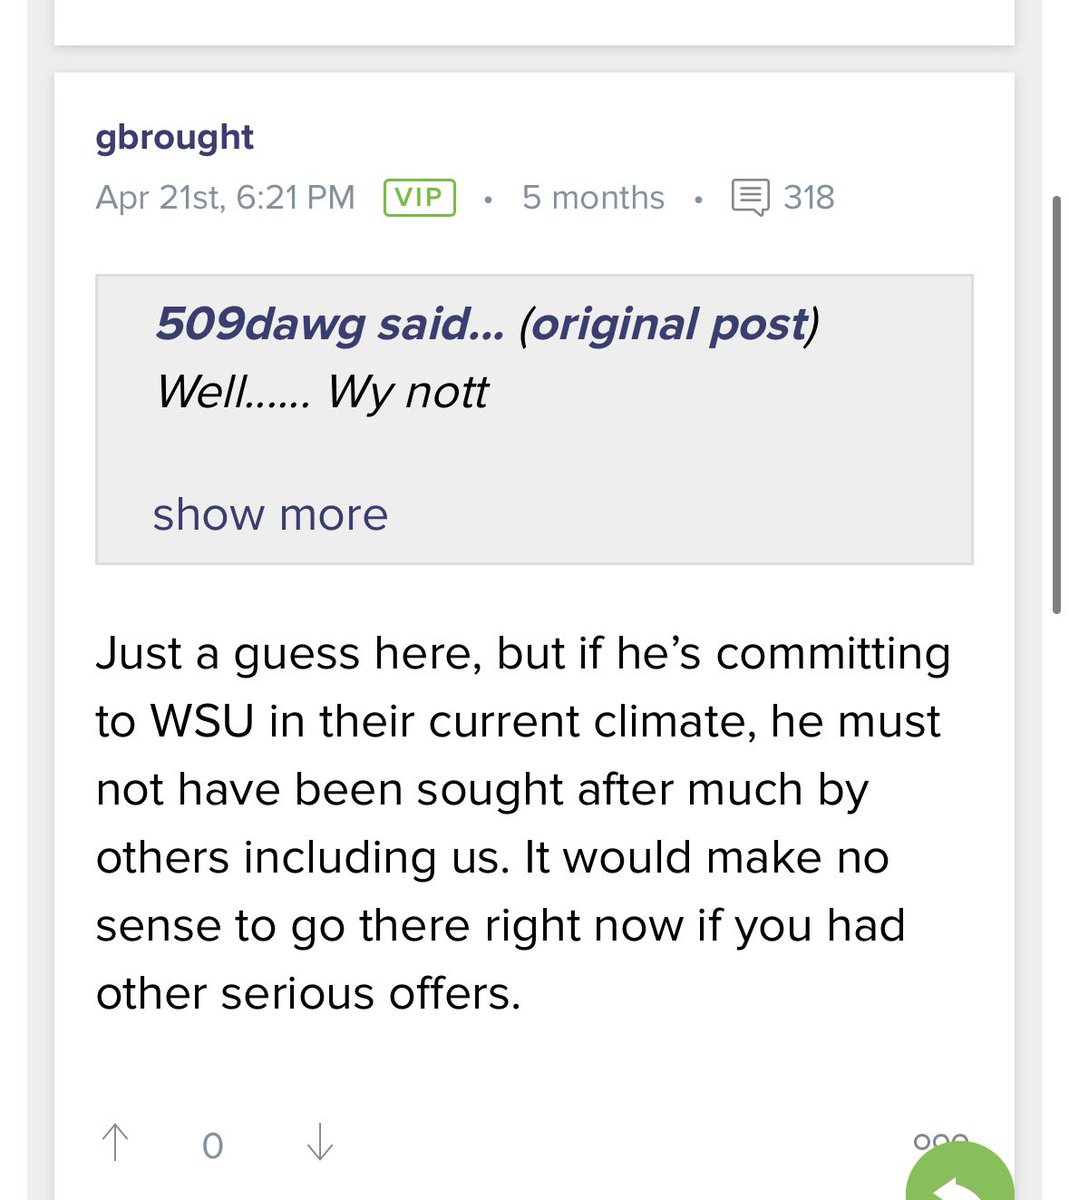 I love reading the dawgman boards when they don’t get their way 

Kase Wynott chooses wazzu over UW do they claim he wasn’t sought after

Even tho their current coach had him committed at Utah state & reoffered him at UW

just a LOL statement to make by gbrought